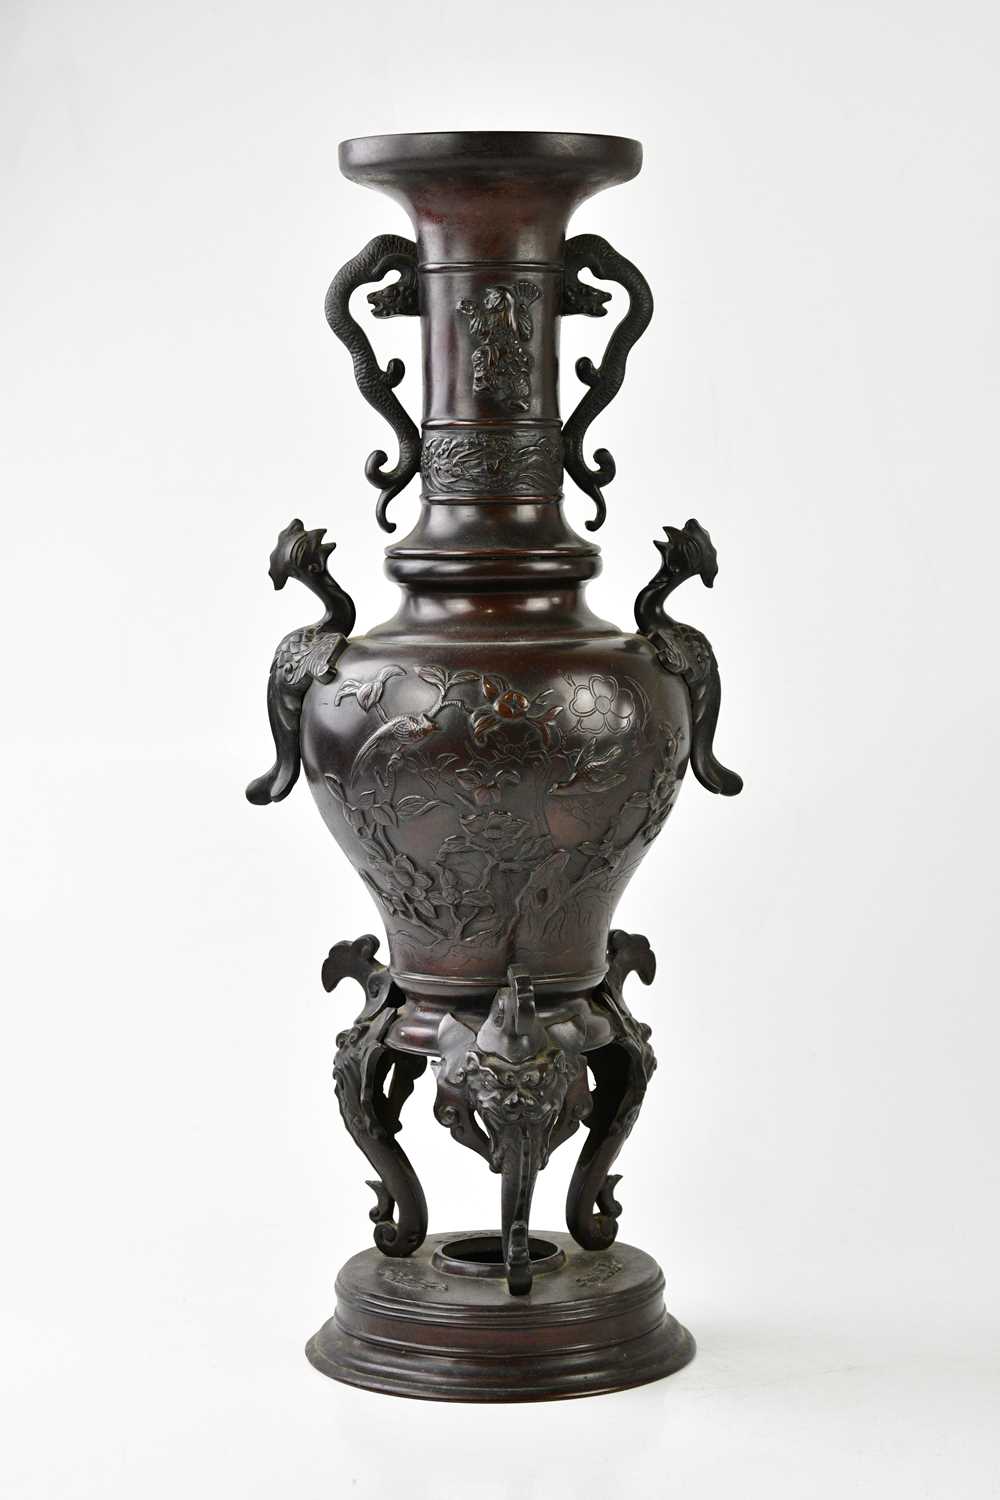 A large early 20th century Japanese bronze vase, with applied handles and crawling mythical